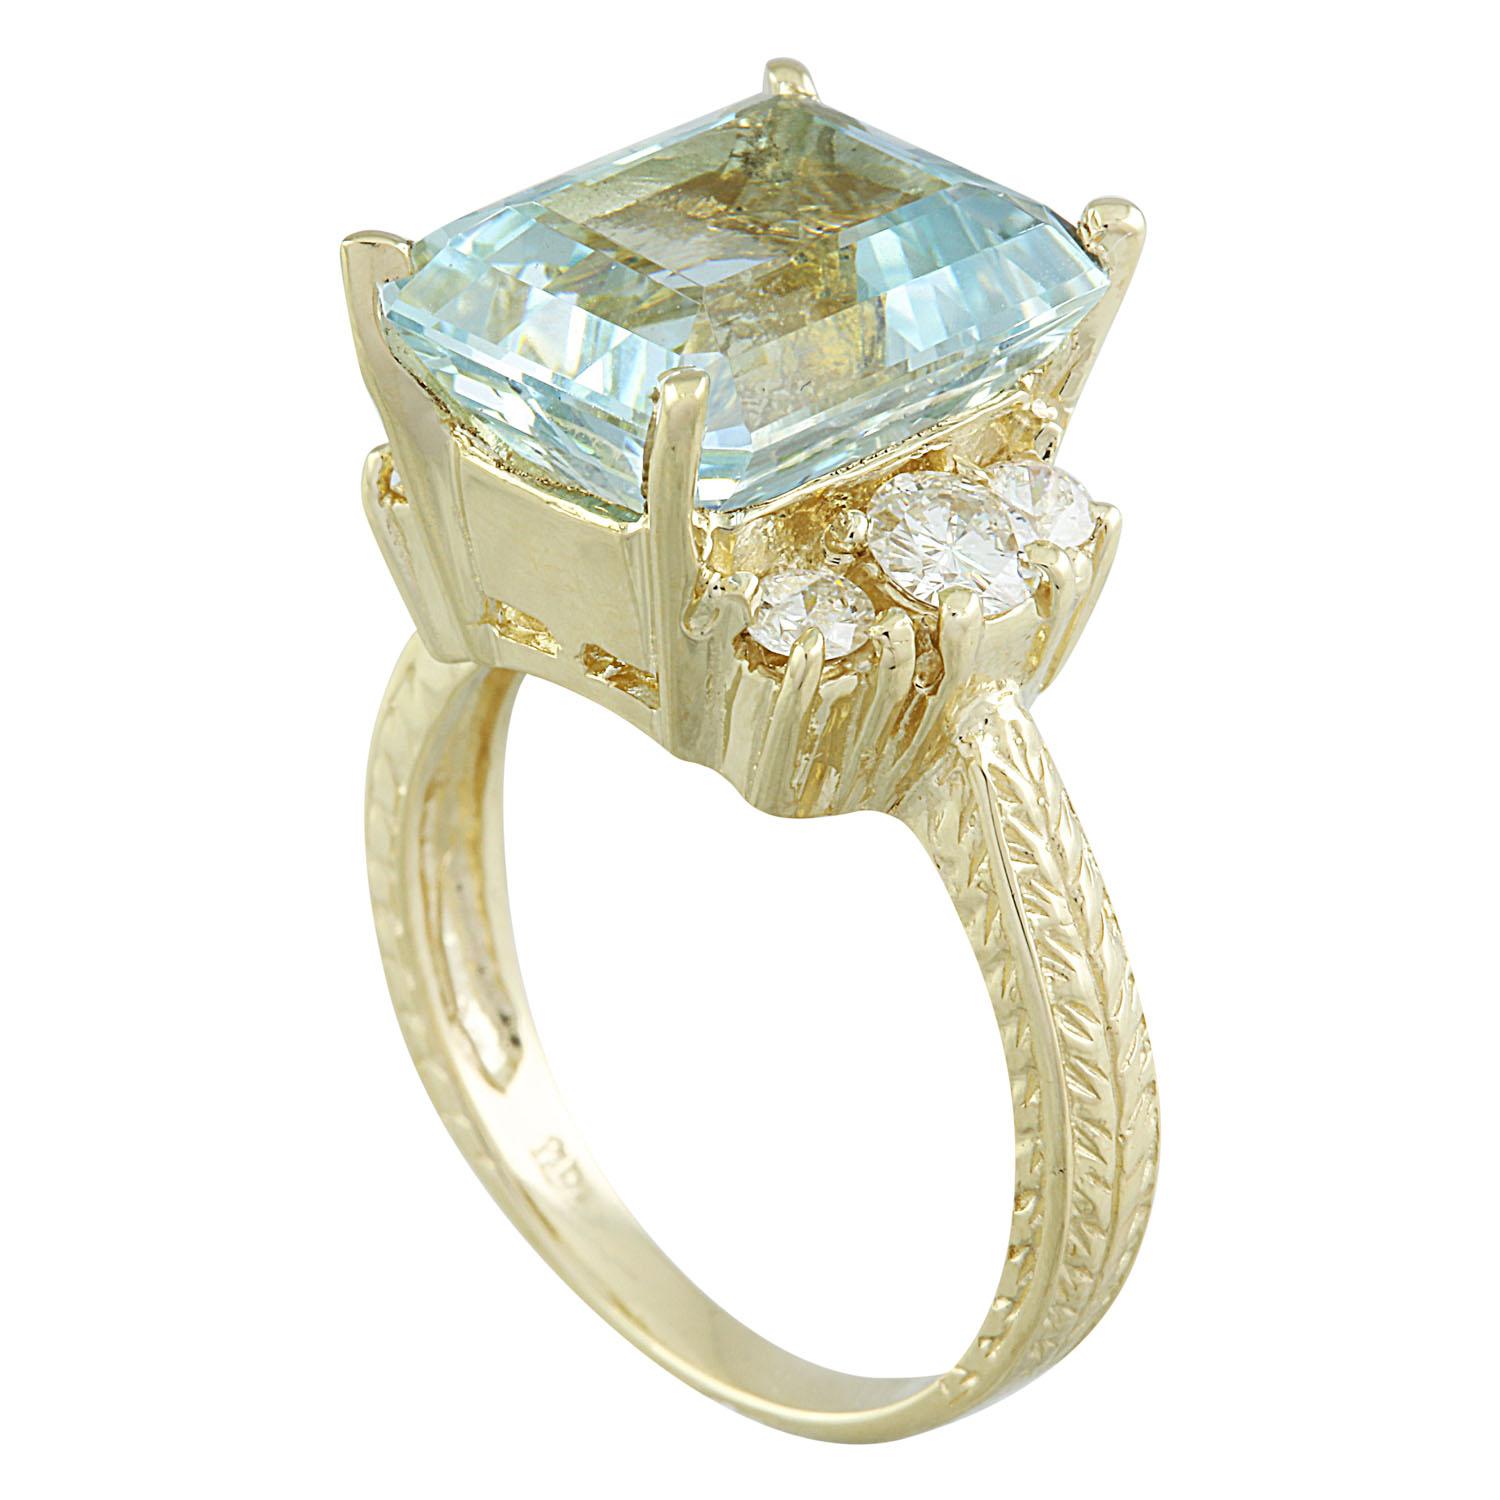 7.90 Carat Natural Aquamarine 14 Karat Solid Yellow Gold Diamond Ring
Stamped: 14K 
Total Ring Weight: 6.5 Grams 
Aquamarine Weight 7.15 Carat (12.00x10.00 Millimeters)
Diamond Weight: 0.75 carat (F-G Color, VS2-SI1 Clarity )
Quantity: 6
Face